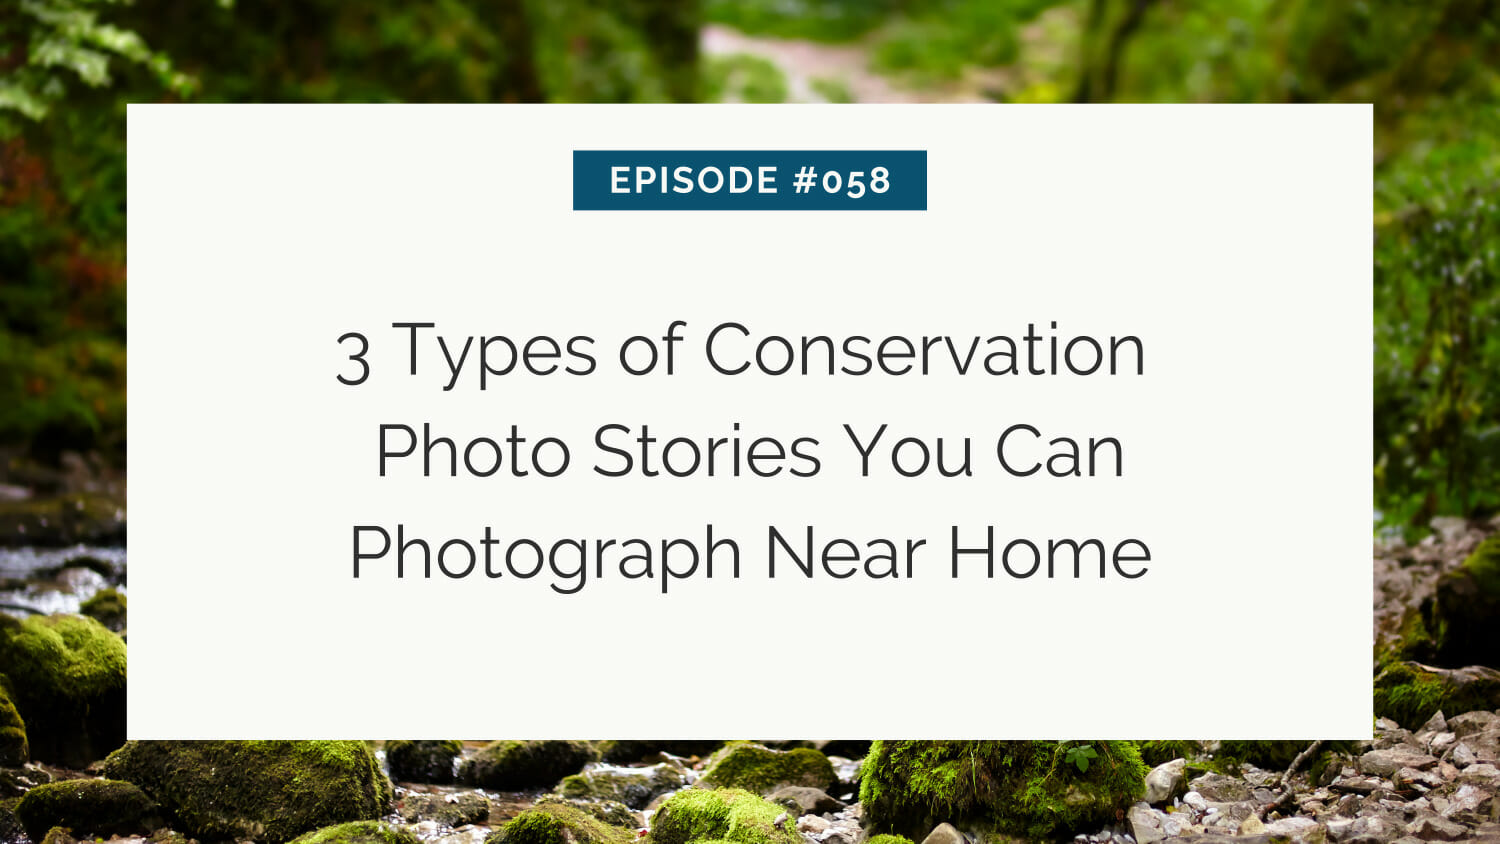 Title slide for episode #058 on "3 types of conservation photo stories you can photograph near home" set against a serene forest background.